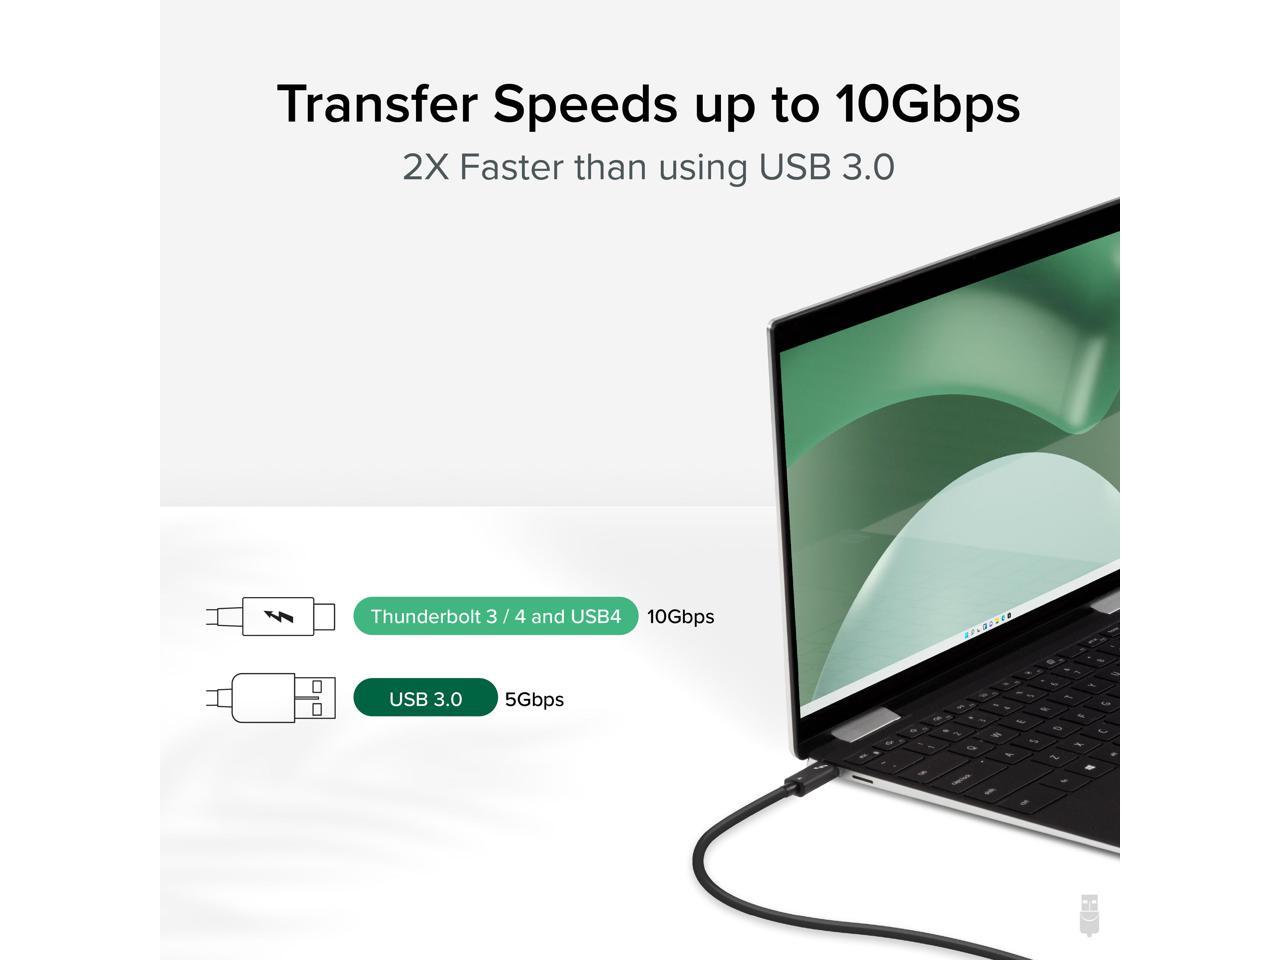 Plugable Windows Transfer Cable 6.6ft (2m), Thunderbolt 10Gbps, Bundled with Bravura Software for Windows PC to PC Migration - Unlimited Uses. Works between Thunderbolt 3 / 4, USB4 PCs - image 3 of 13